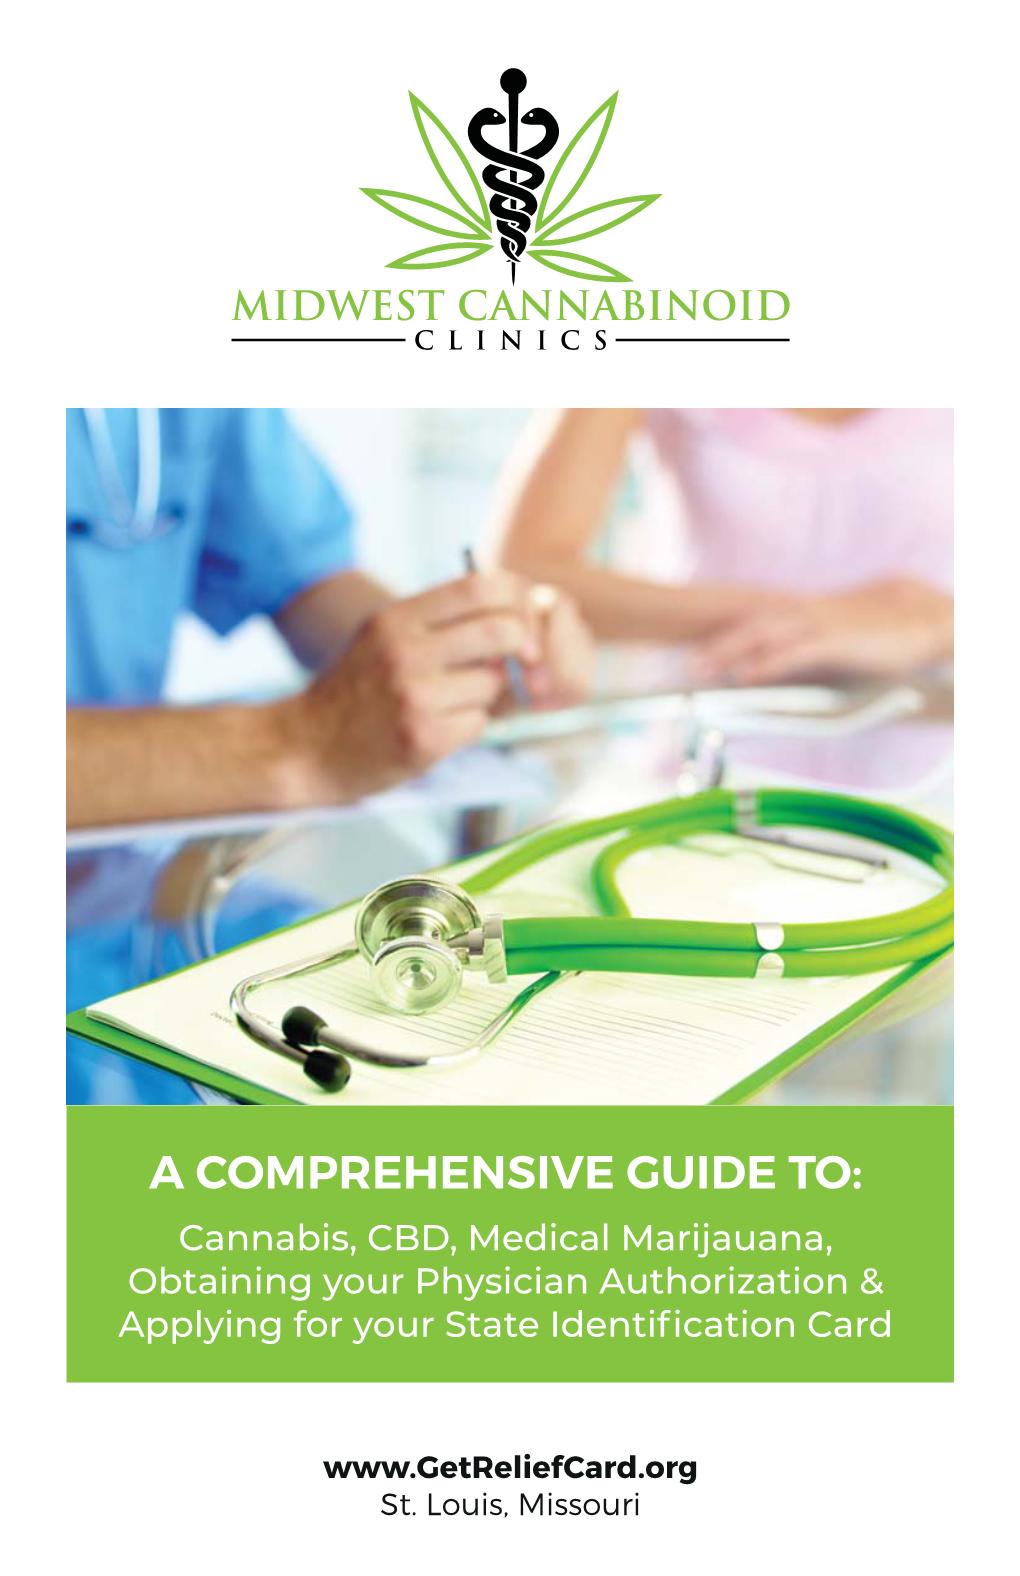 A COMPREHENSIVE GUIDE TO: Cannabis, CBD, Medical Marijauana, Obtaining Your Physician Authorization & Applying for Your State Identiﬁcation Card